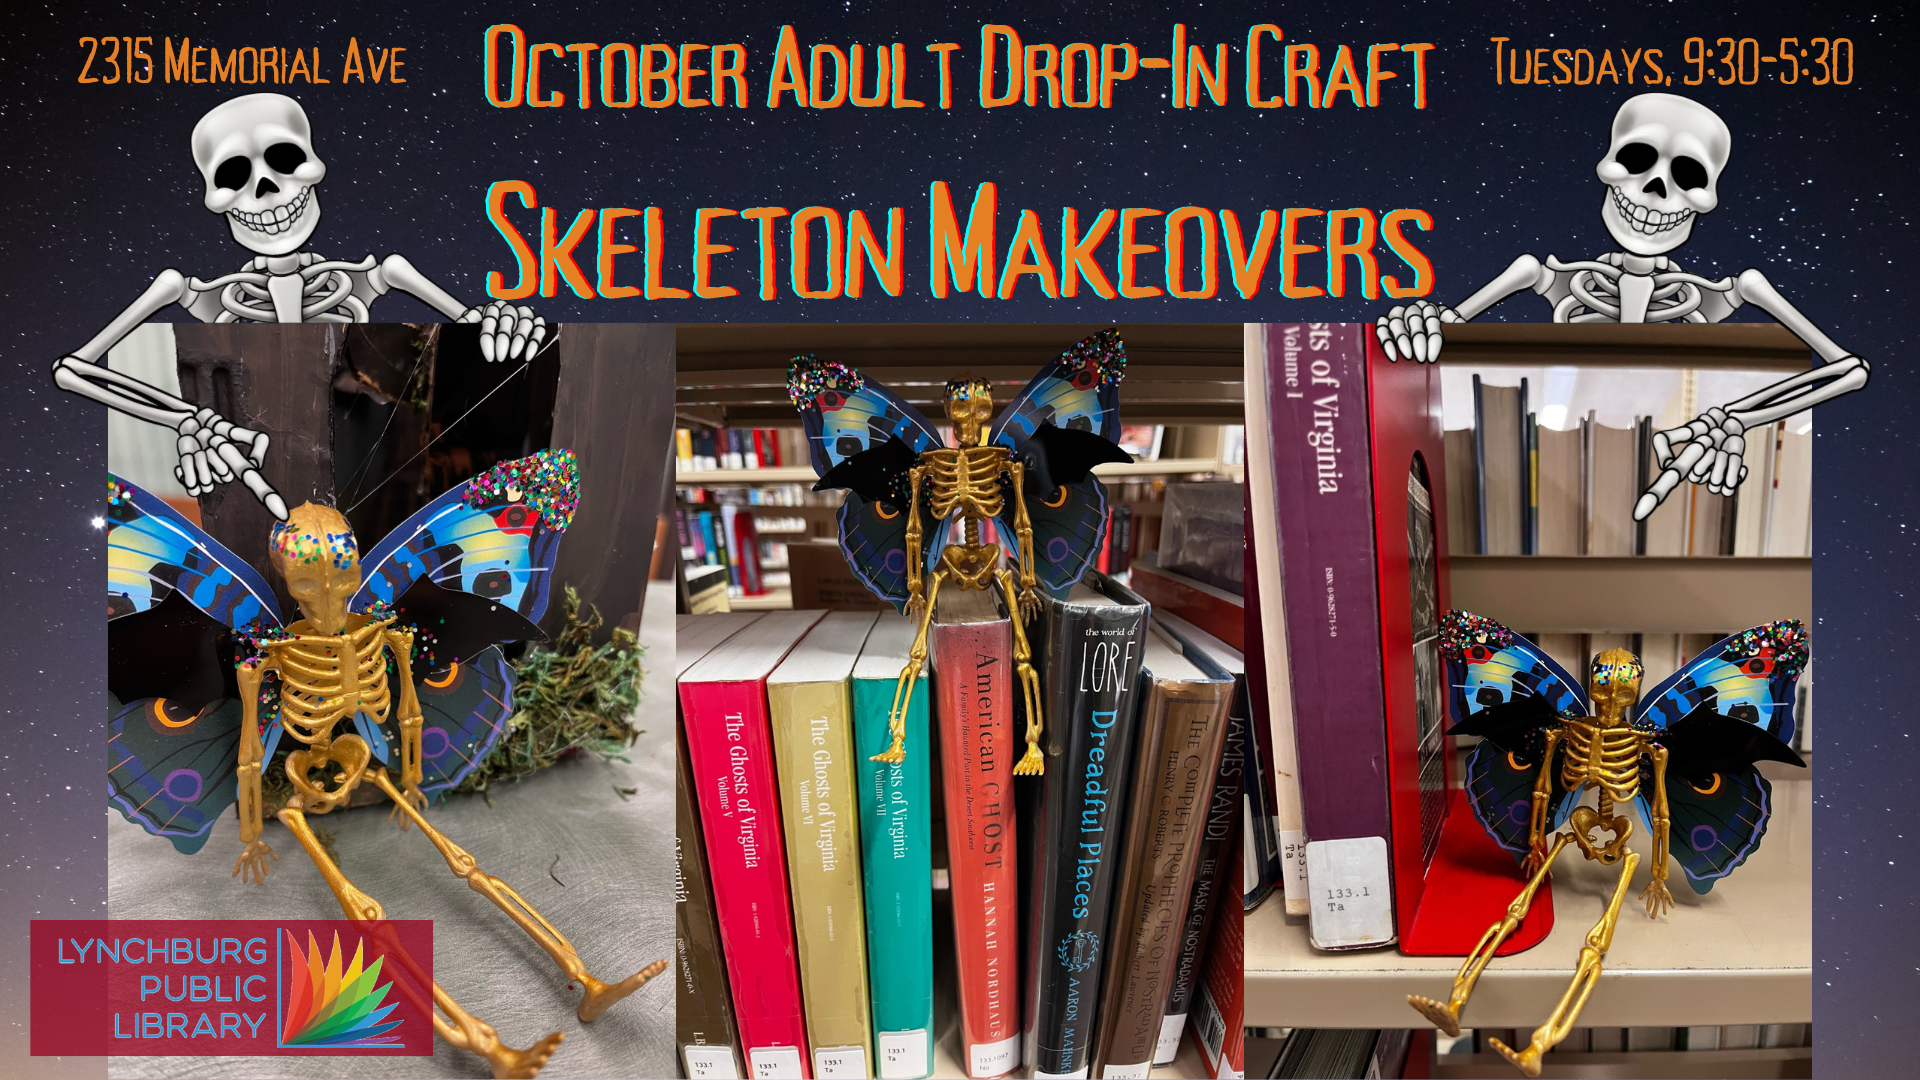 October Adult Drop-In Craft; Skeleton Makeovers; 2315 Memorial Ave,; Tuesdays, 9:30-5:30